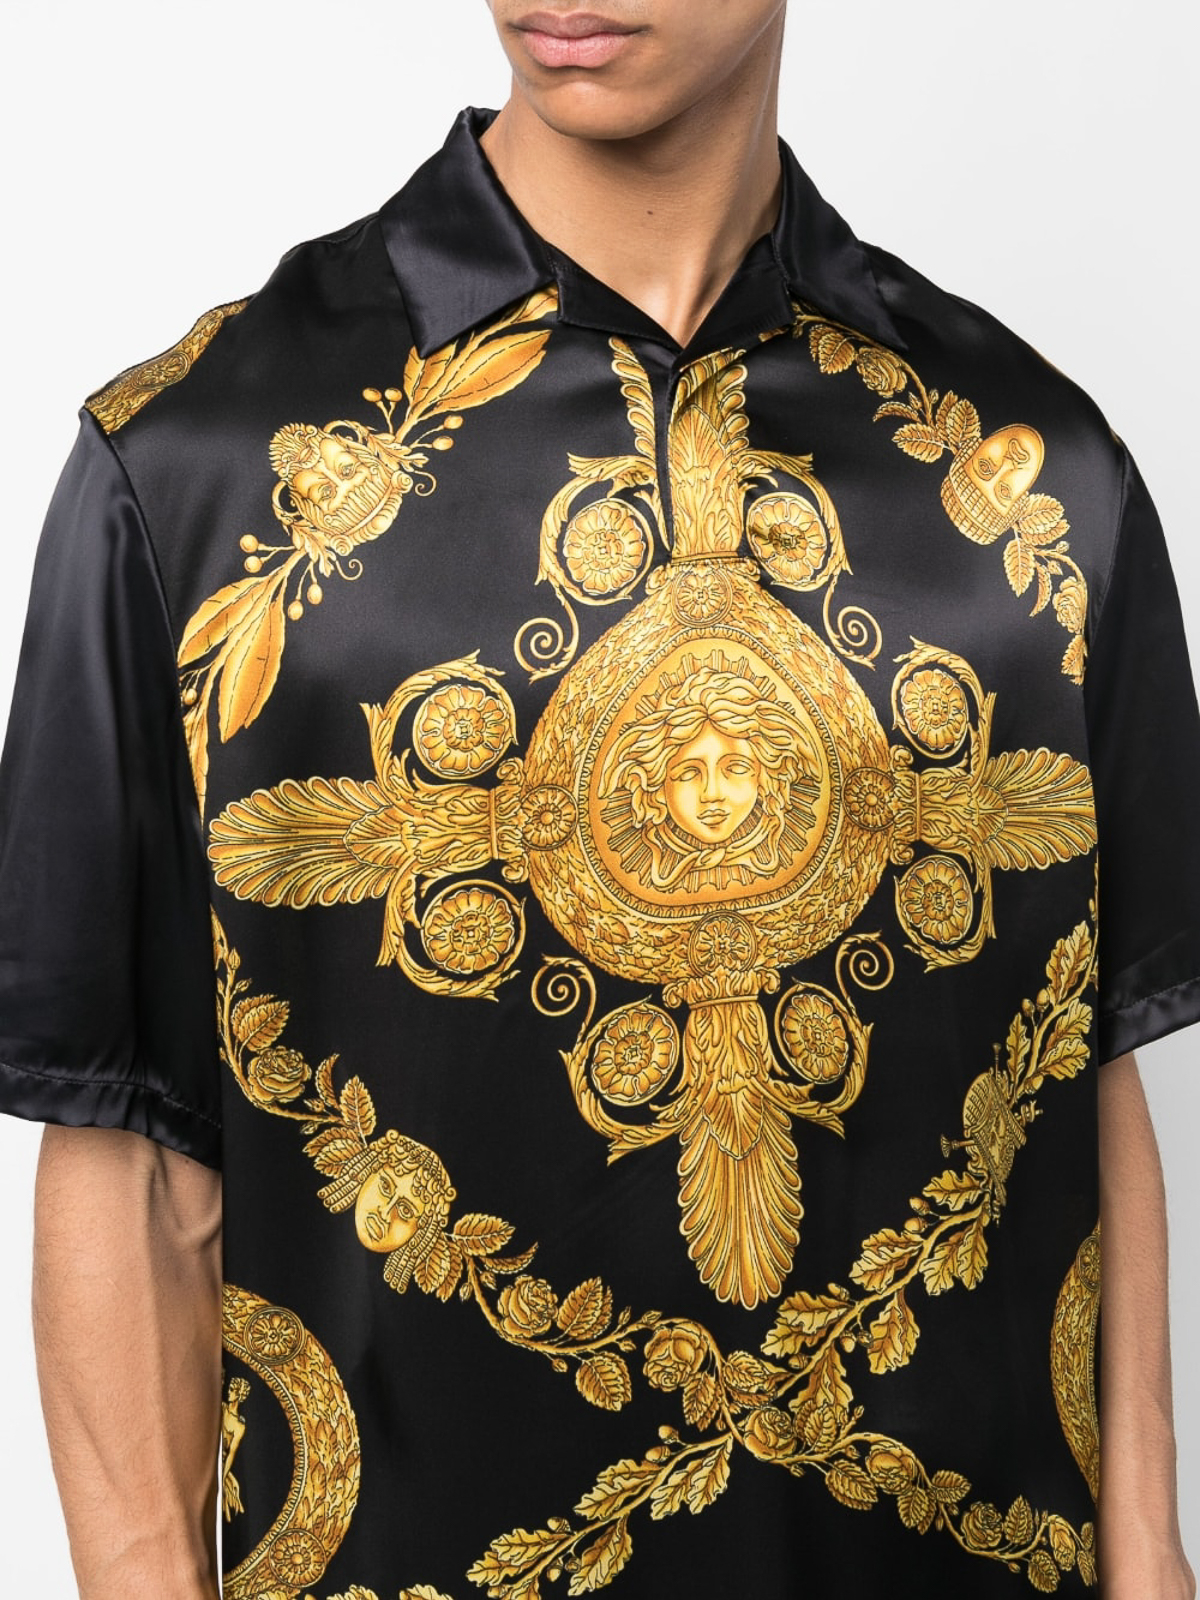 Shop for Mens Black Shirt with Versace Baroque Print